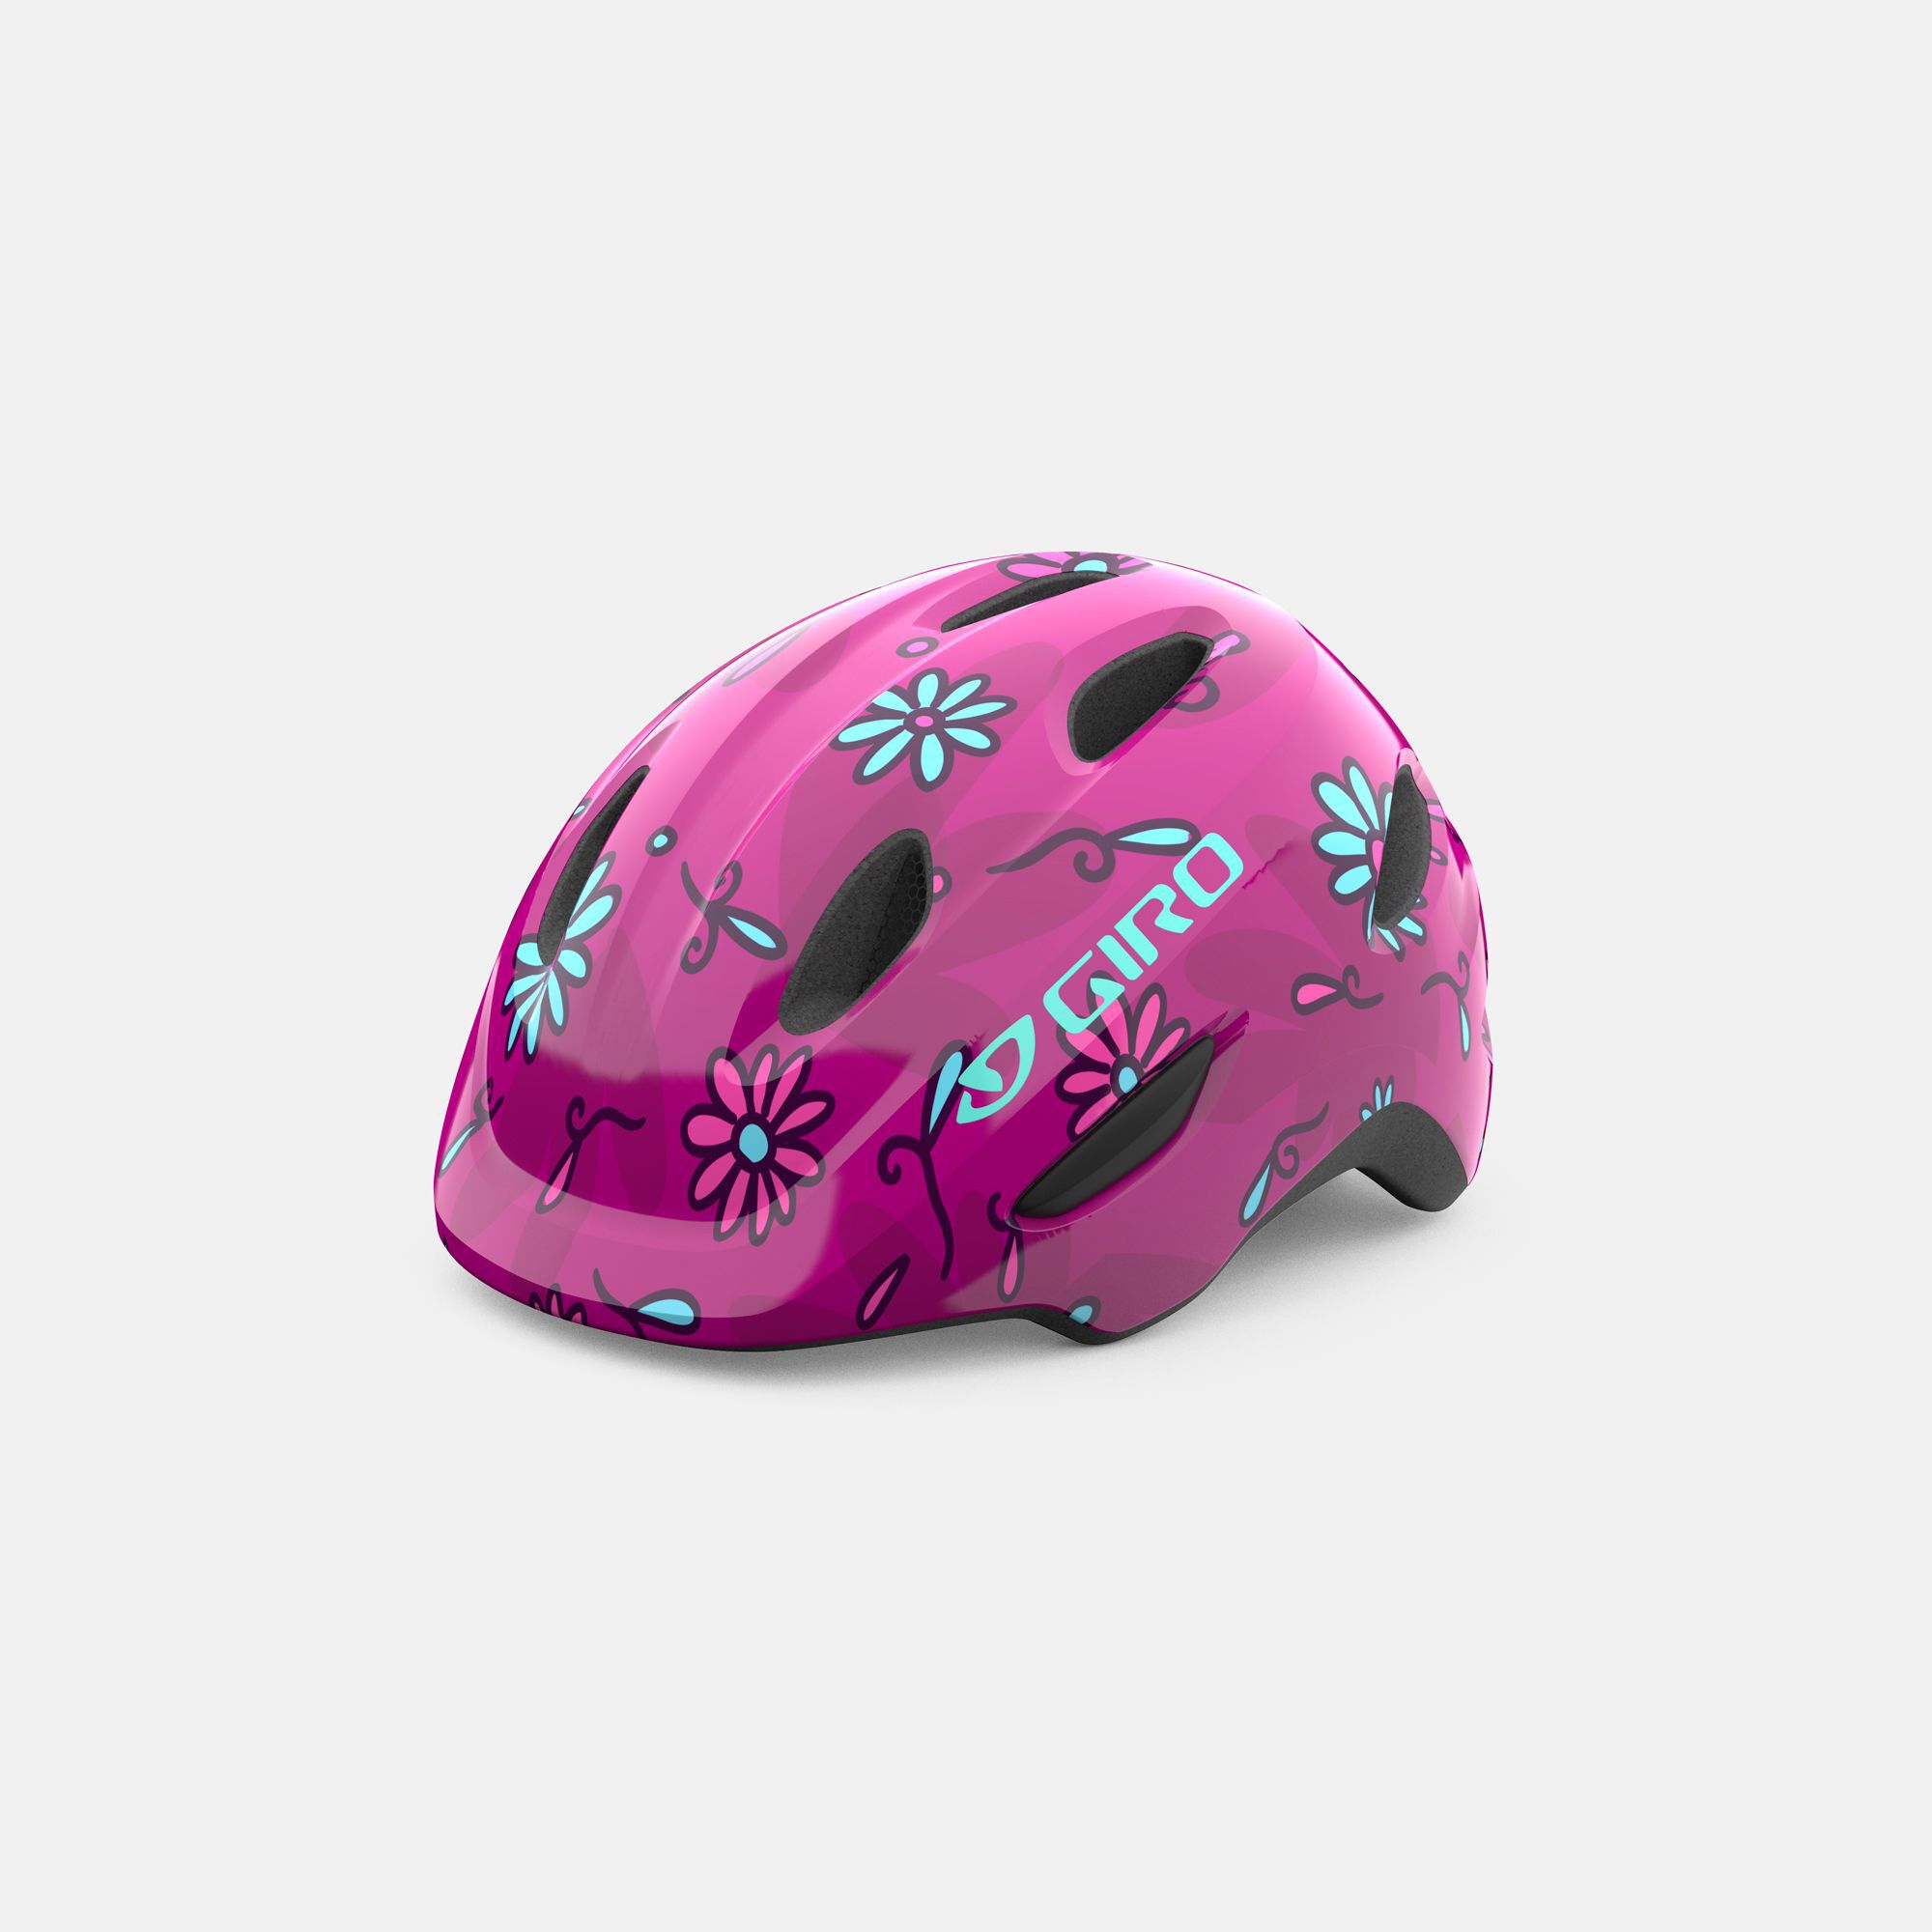 Details about   $60 Giro Dime Youth MIPS Helmet Coral XS 47-51 or S 51-55 NWT Girl Ski Snowboard 